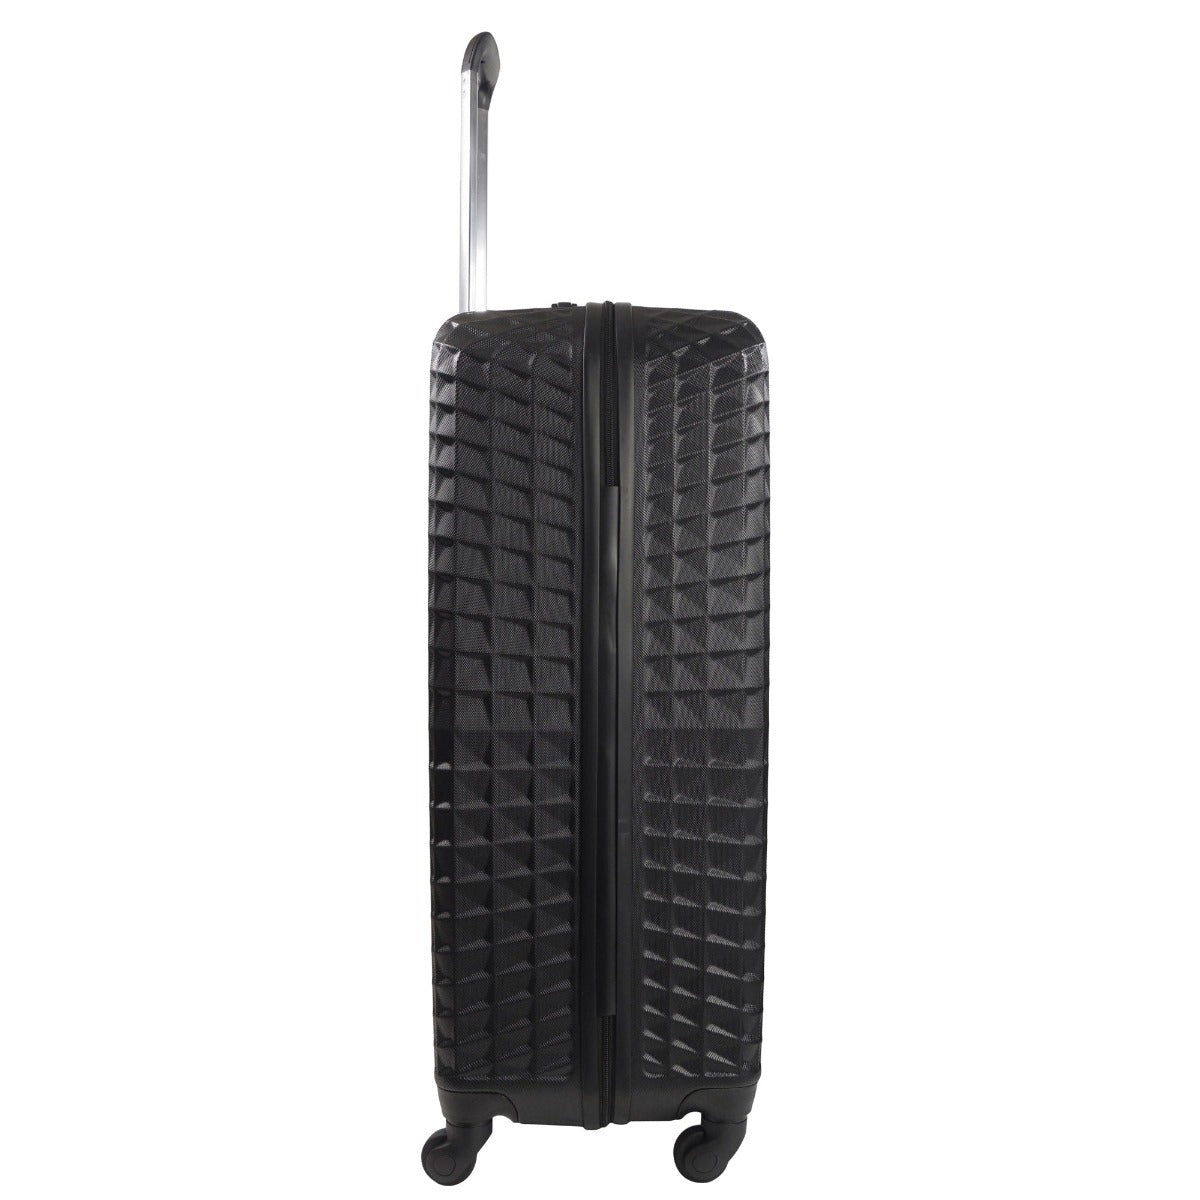 Ful Geo 31 inch hard sided spinner suitcase luggage black large checked bag